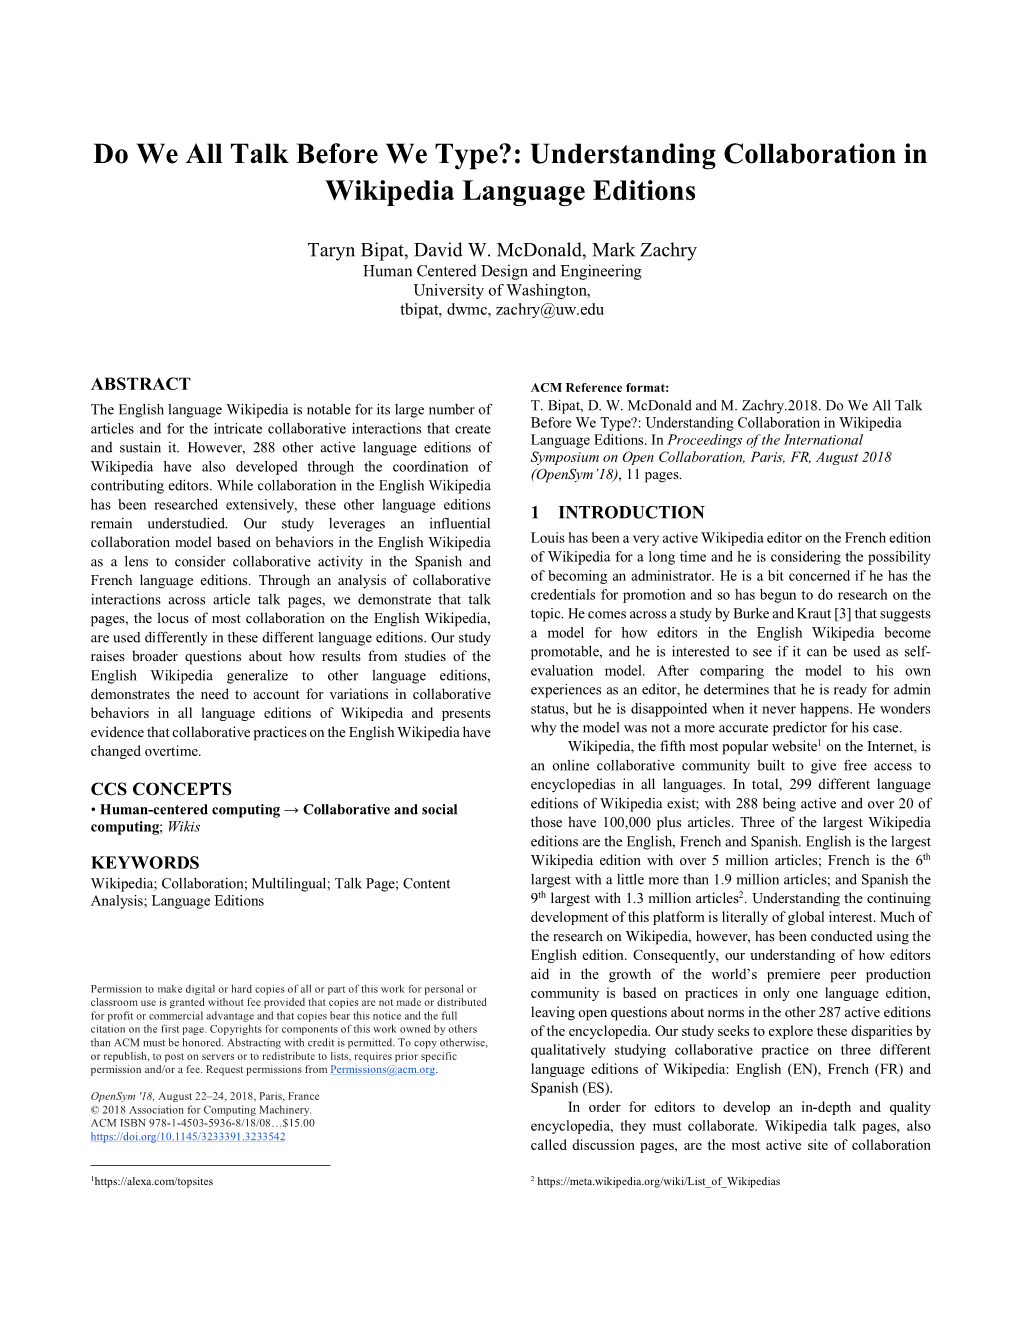 Do We All Talk Before We Type?: Understanding Collaboration in Wikipedia Language Editions